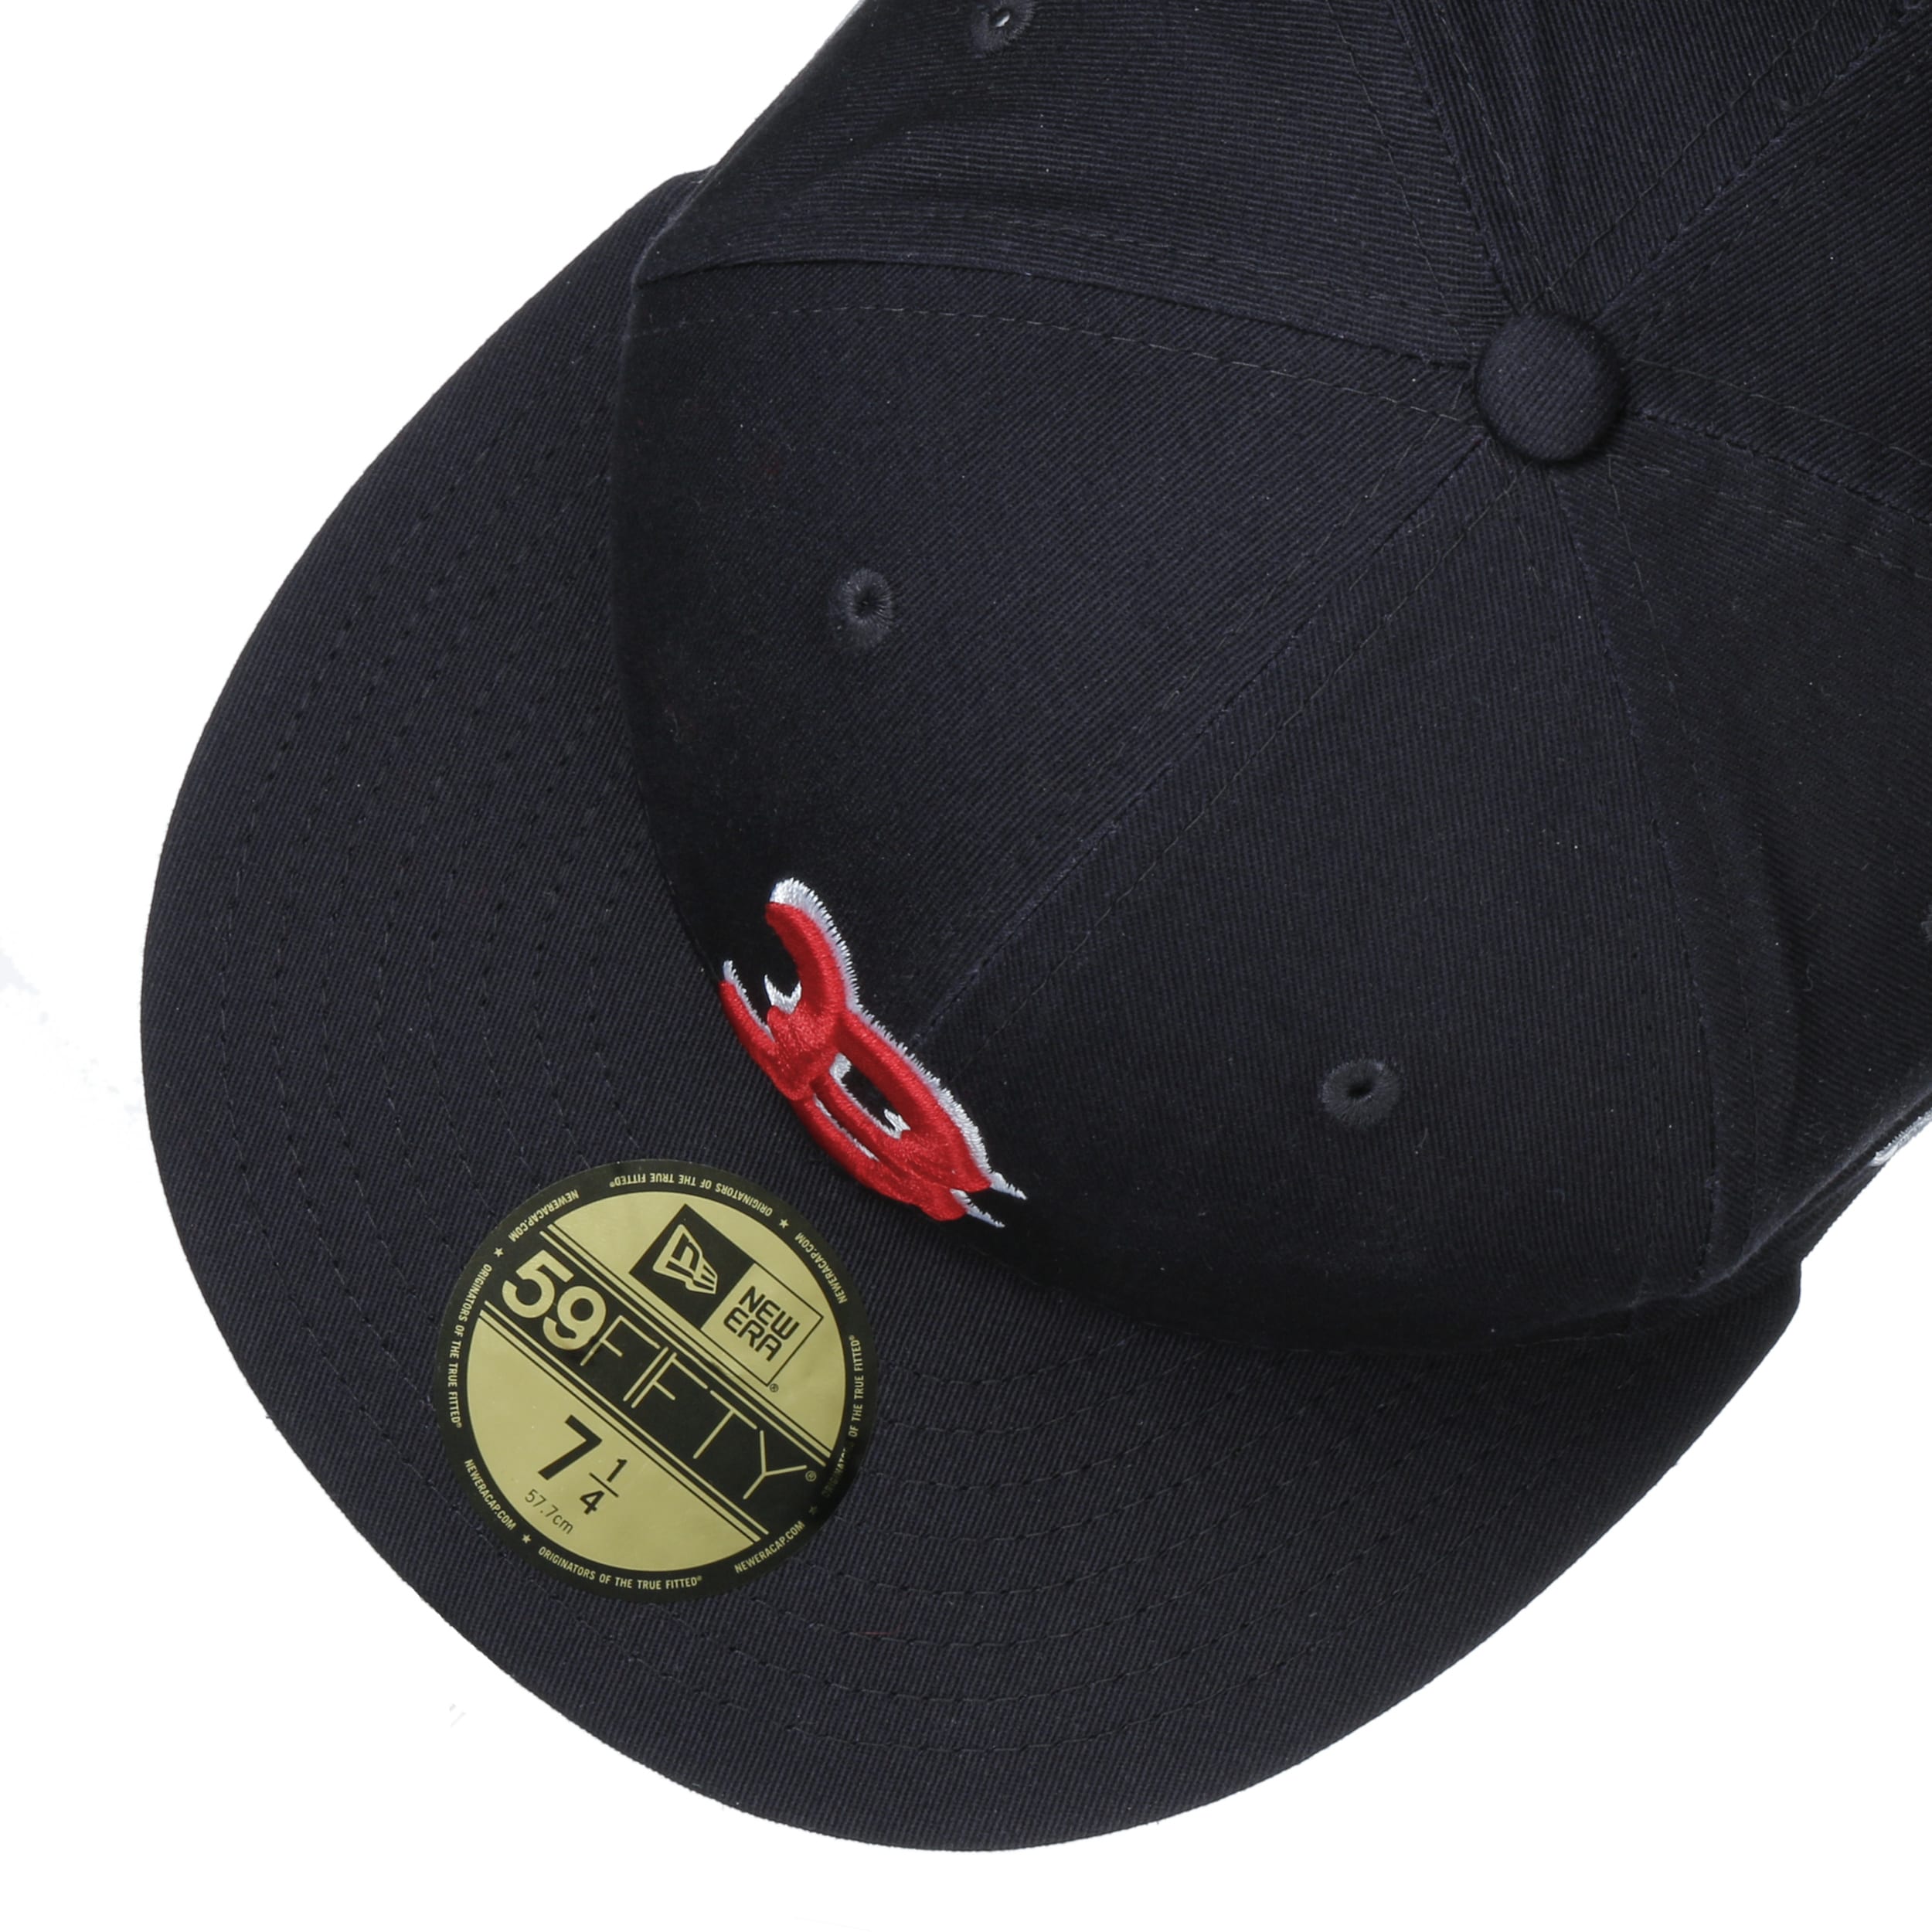 New Era 59Fifty MLB Boston Red Sox Black on Black Fitted Cap